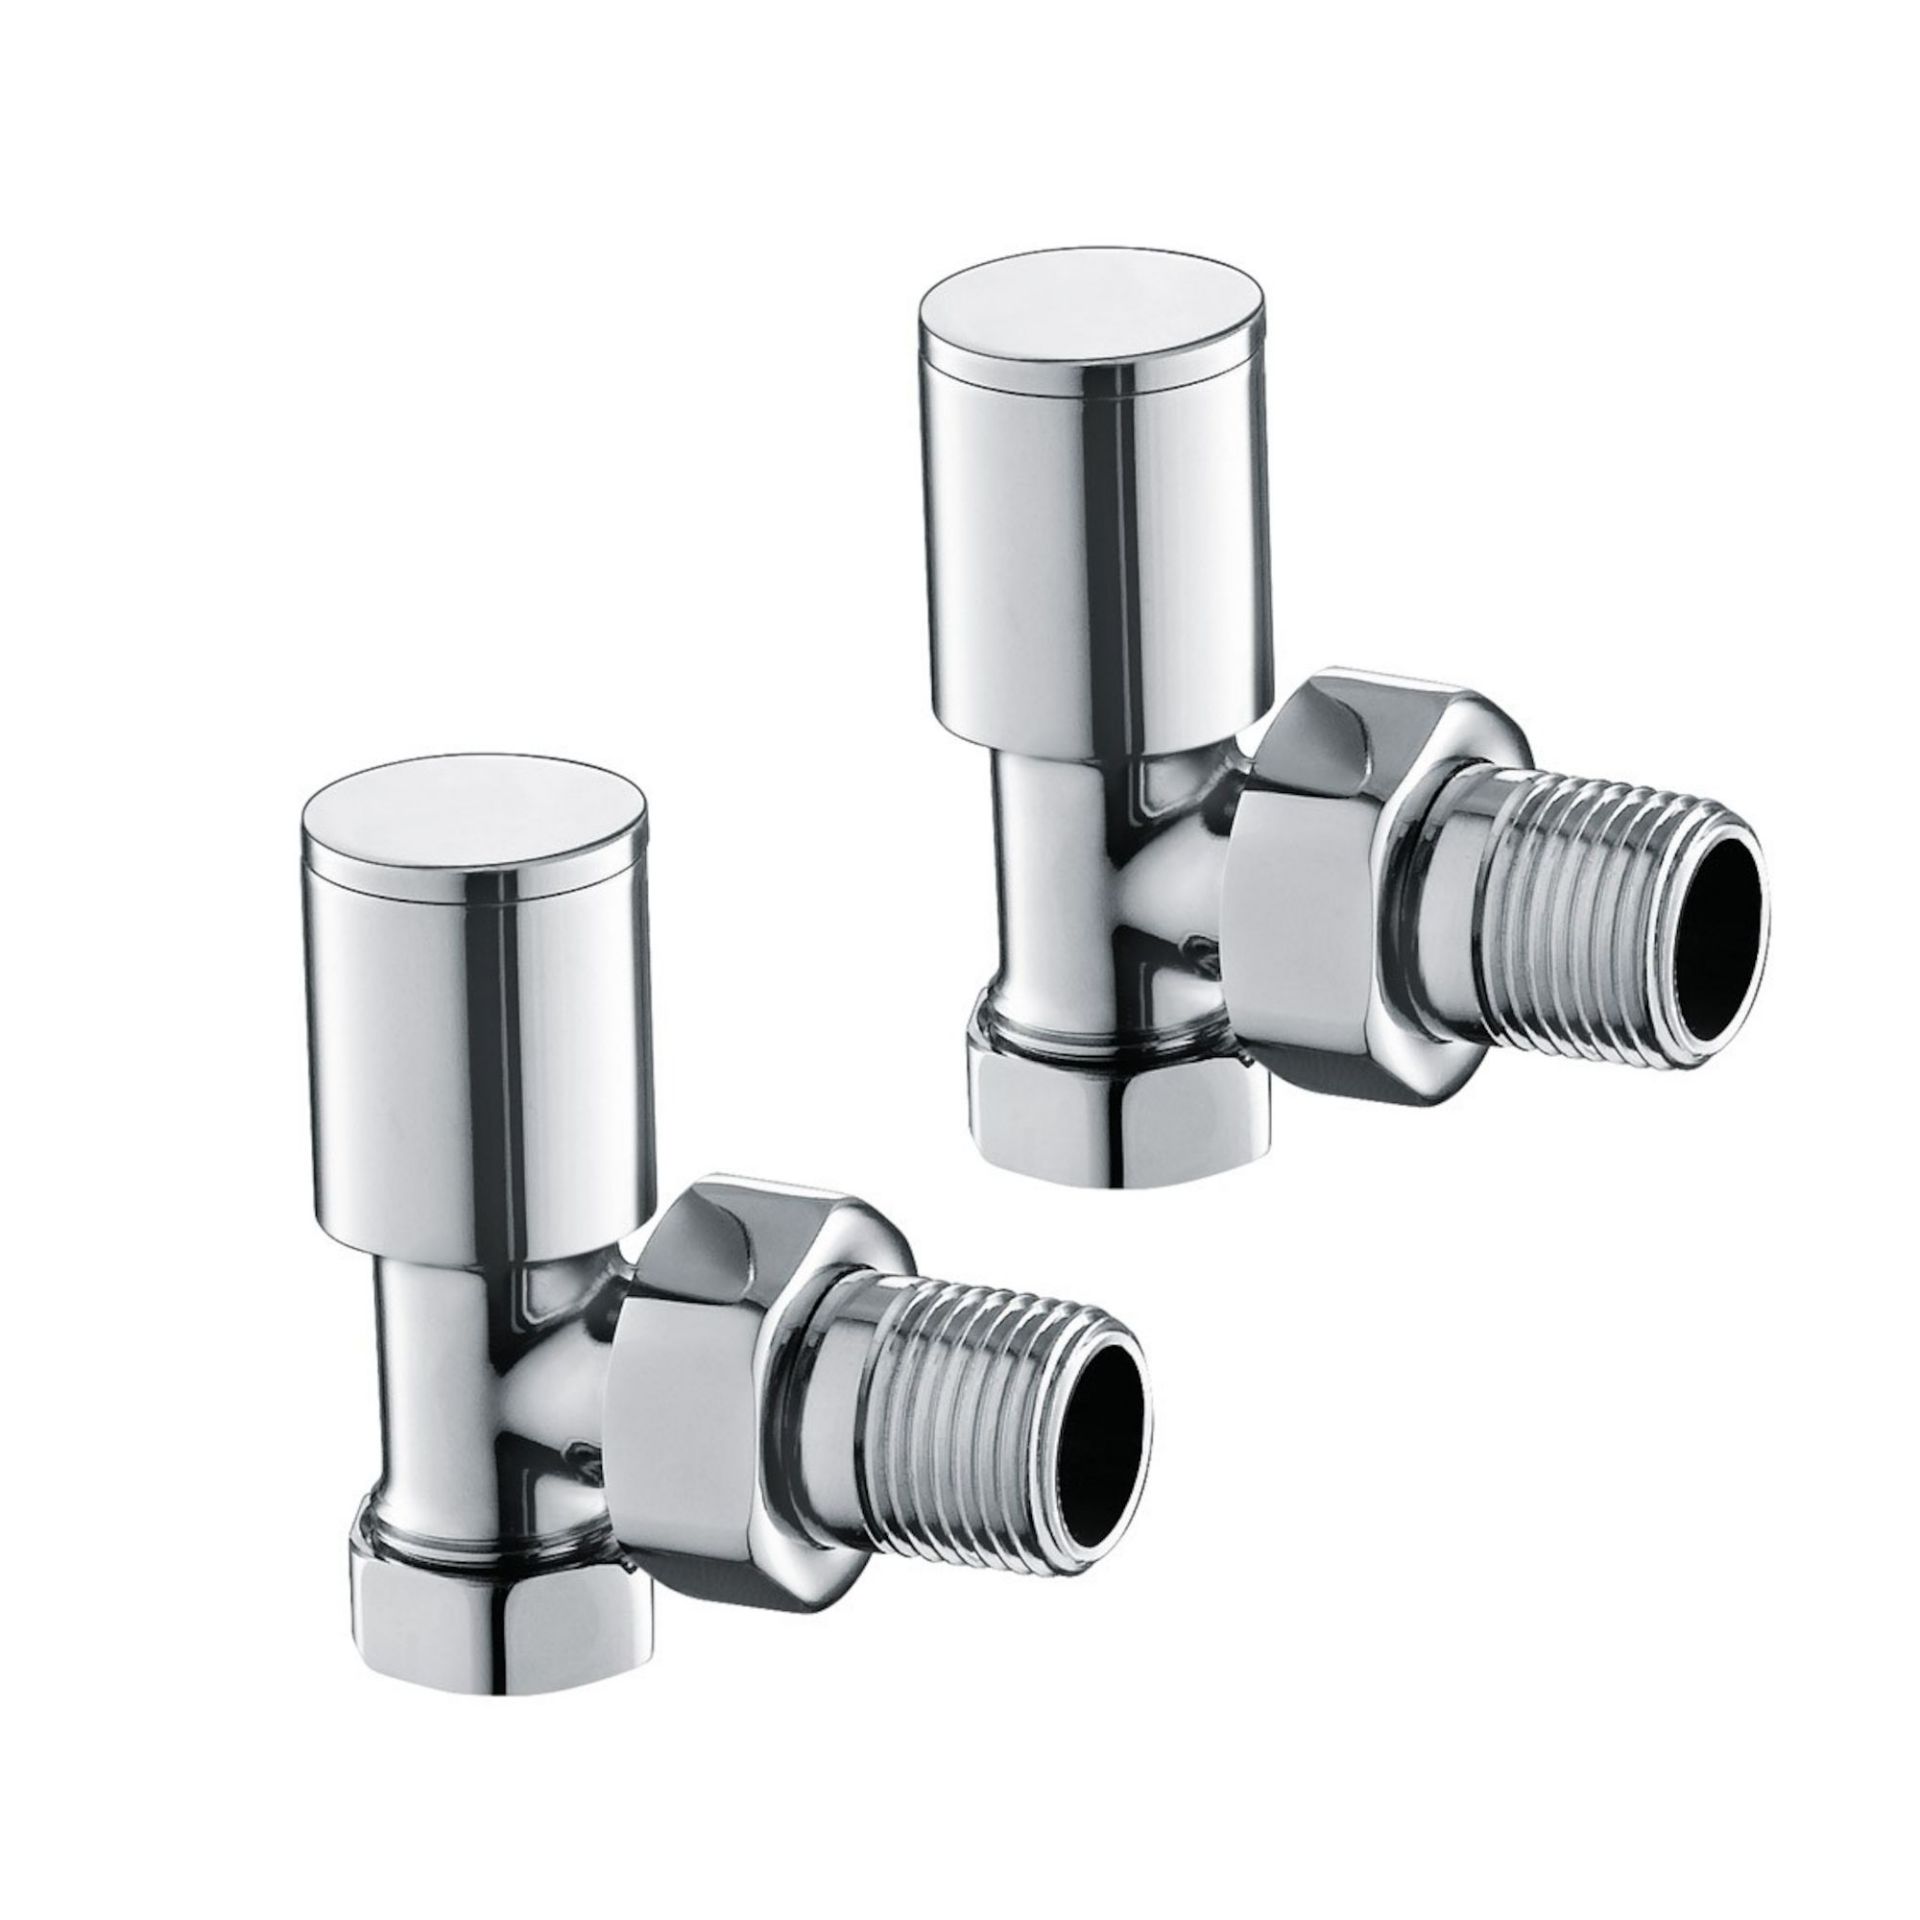 (D1010) 15mm Standard Connection Angled Radiator Valves - Heavy Duty Polished Chrome Plated Bra... - Image 2 of 4